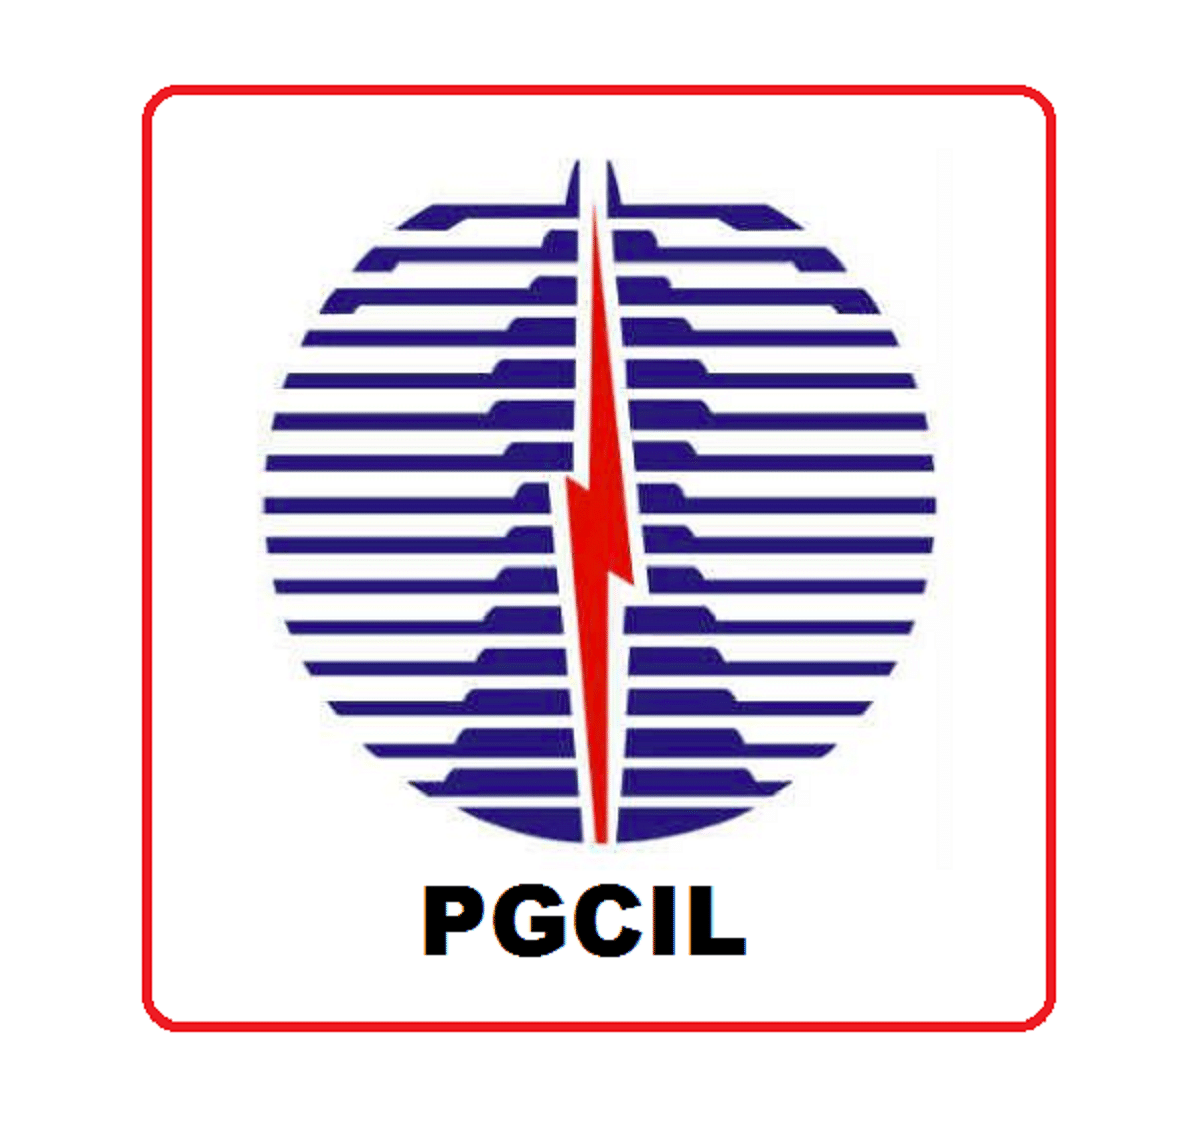 PGCIL Recruitment 2020: Application Process for 110 Assistant Engineer Trainee Posts Ends Tomorrow